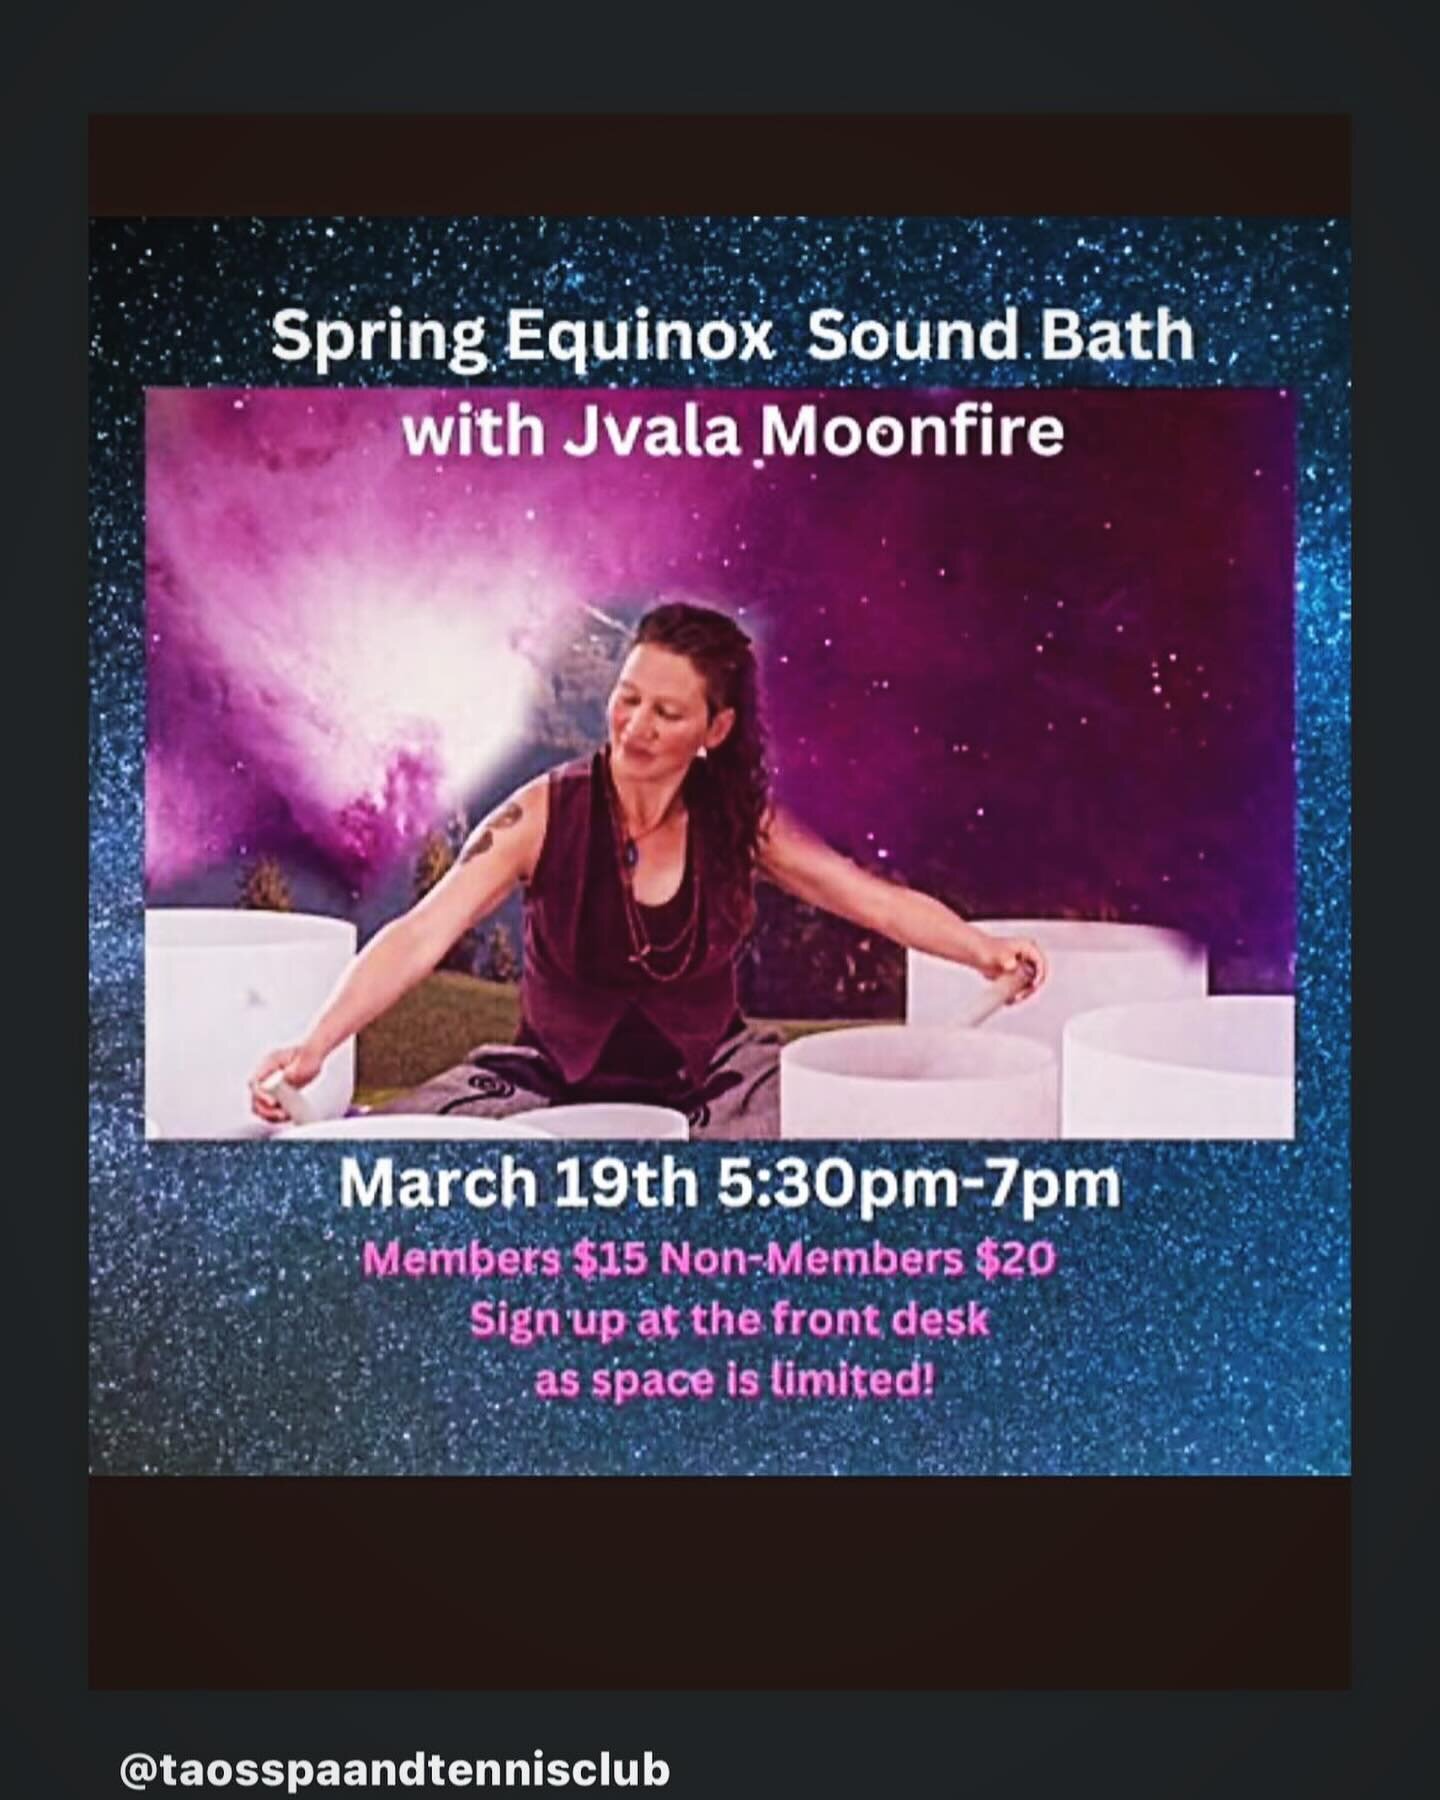 Come join us on the Equinox for an amazing Sound Bowl Bath. March 19th 5:30-7pm! #taosspaandtennisclub #soundhealing #soundbowls #yoga #taos